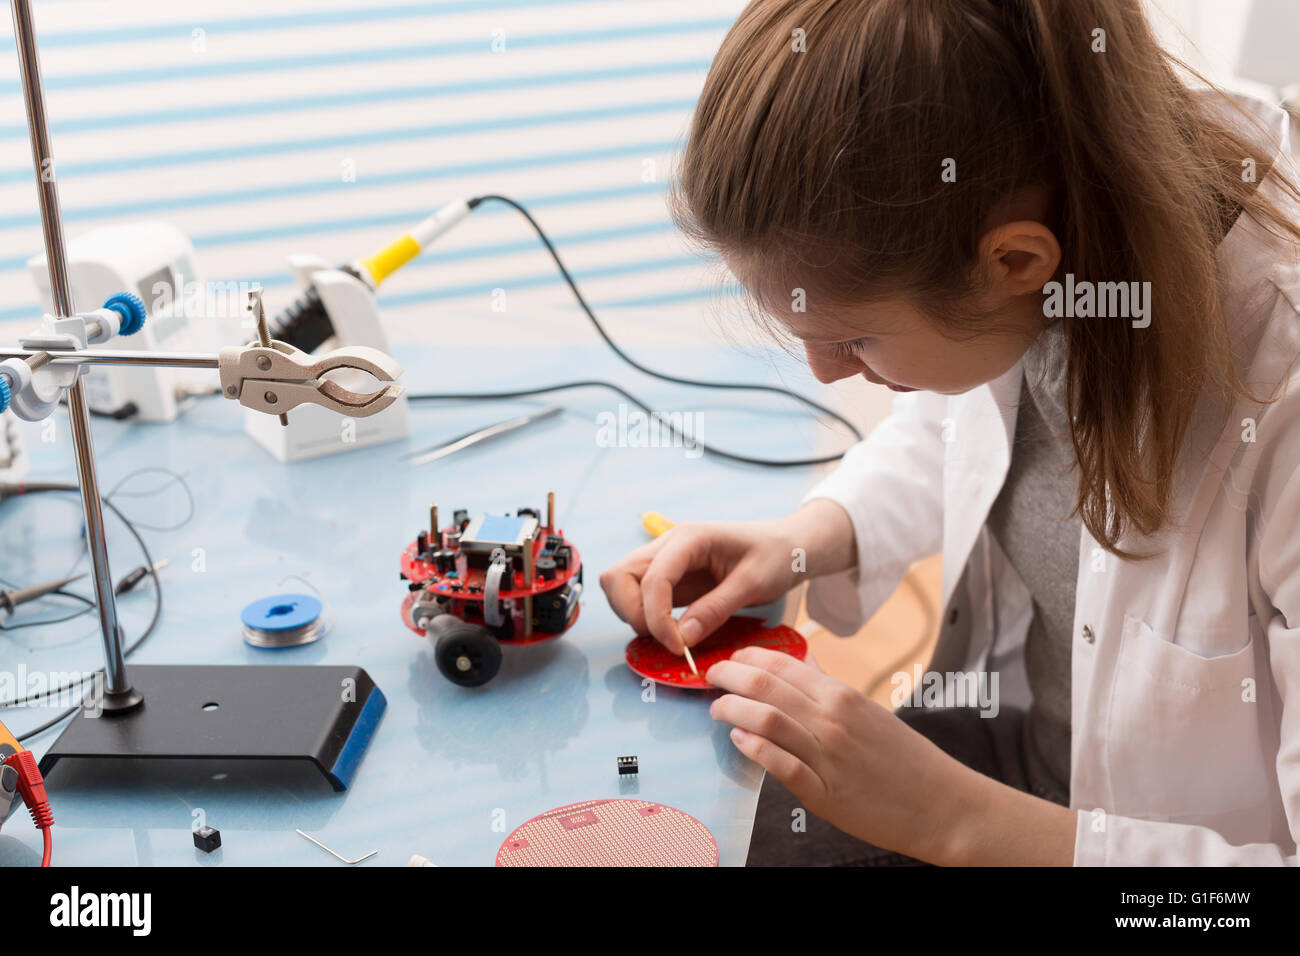 MODEL RELEASED. Female technician working with electrical equipment in the laboratory. Stock Photo